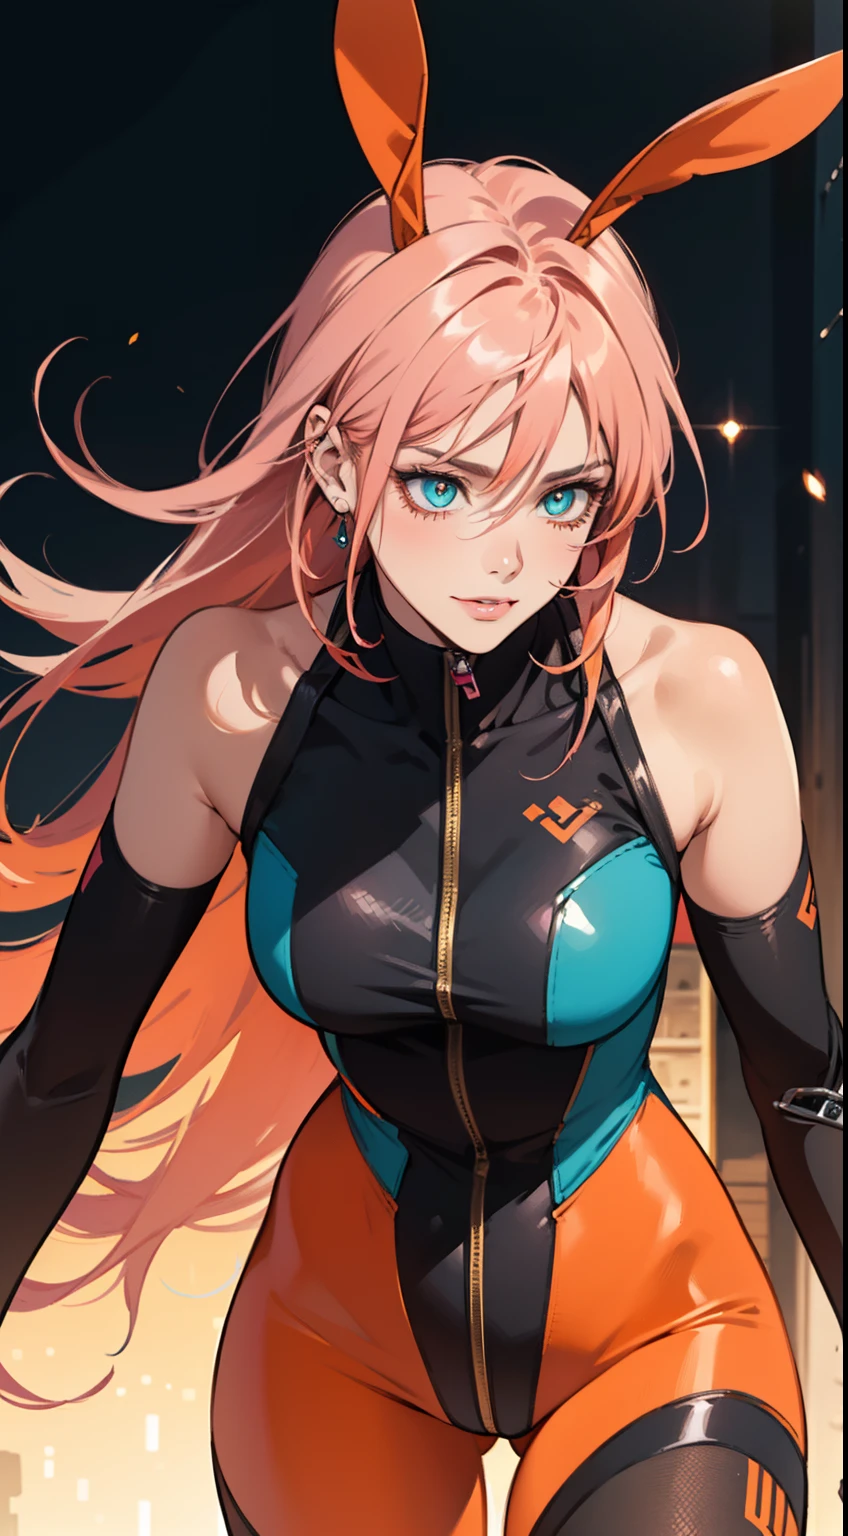 ((Best Quality)), ((Masterpiece)), ((Realistic)) tsuka kendou, 1woman, cute face, determined look, smile, long_legs, full_body, adult mature female ((spiky orange-pink hair,))((orange-pink mullet 1.1)), (long hair), bright cyan_eyes, (yellow_pupil,) hero, sleeveless blue_spandex_bodysuit, long orange-pink rabbit_ears, colored concept art, highly detailed character design, highly detailed face, Vivid and colorful colors, Delicate lines,